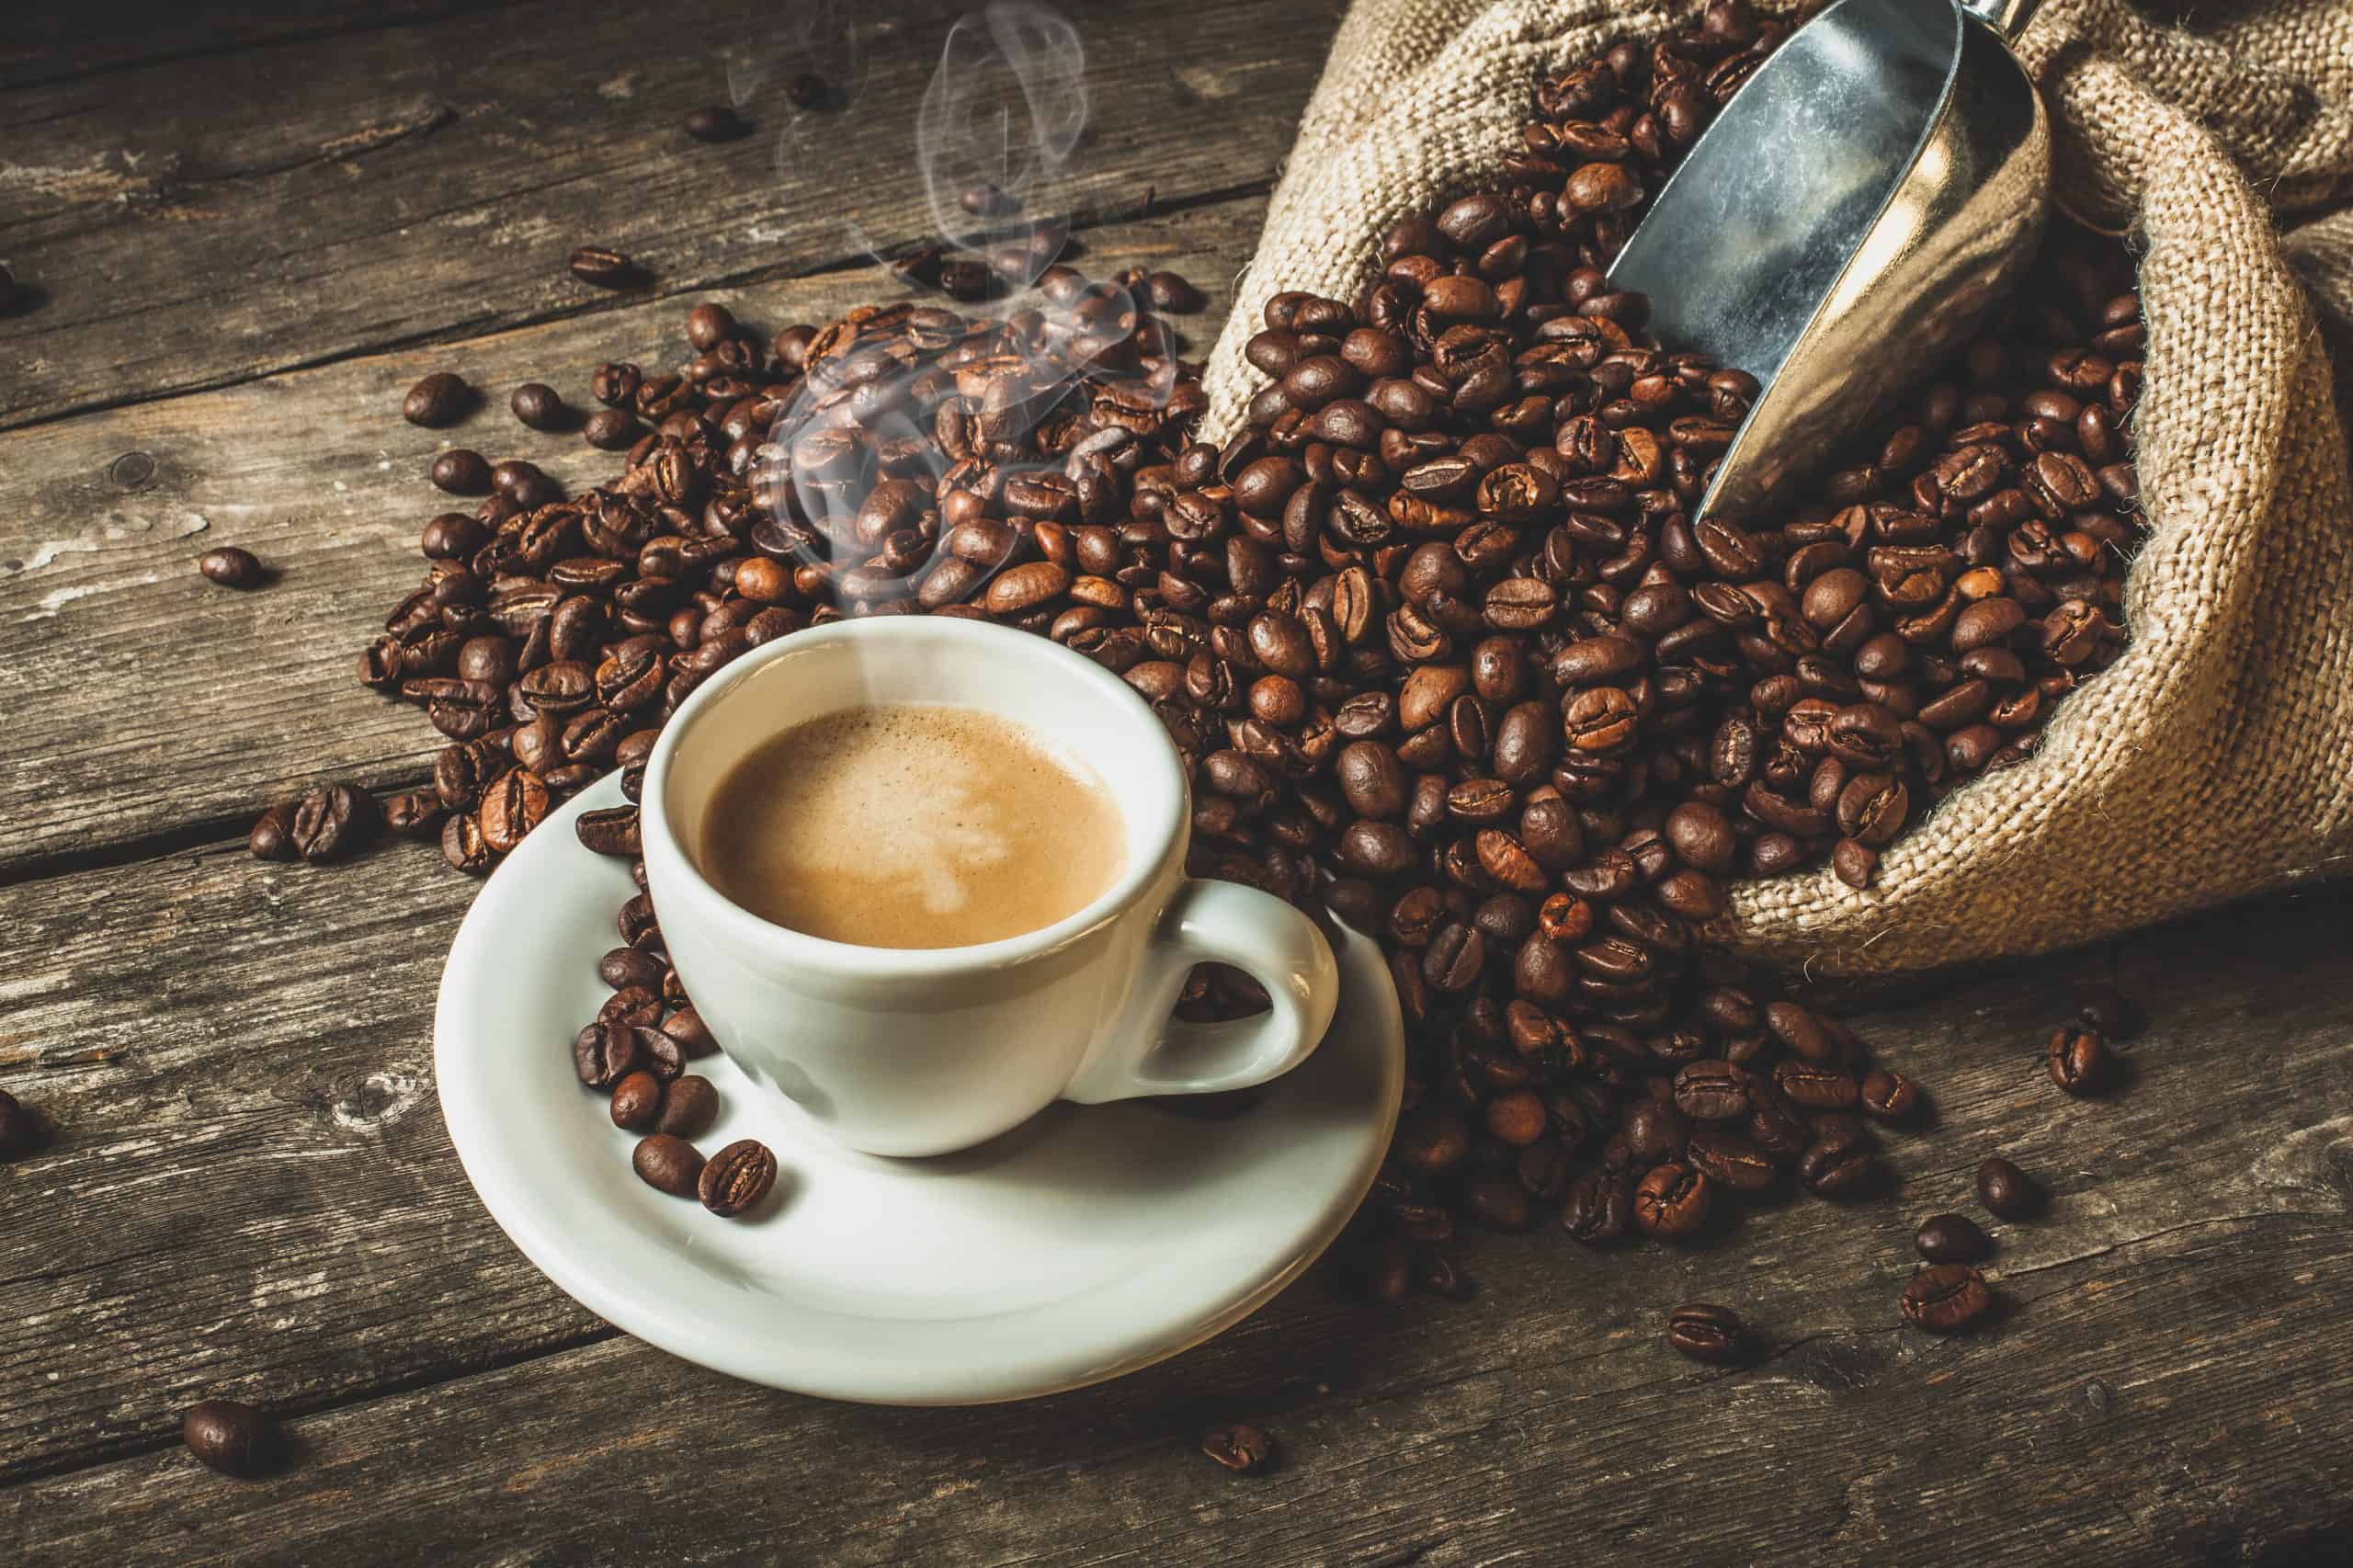 These coffee properties are worth knowing